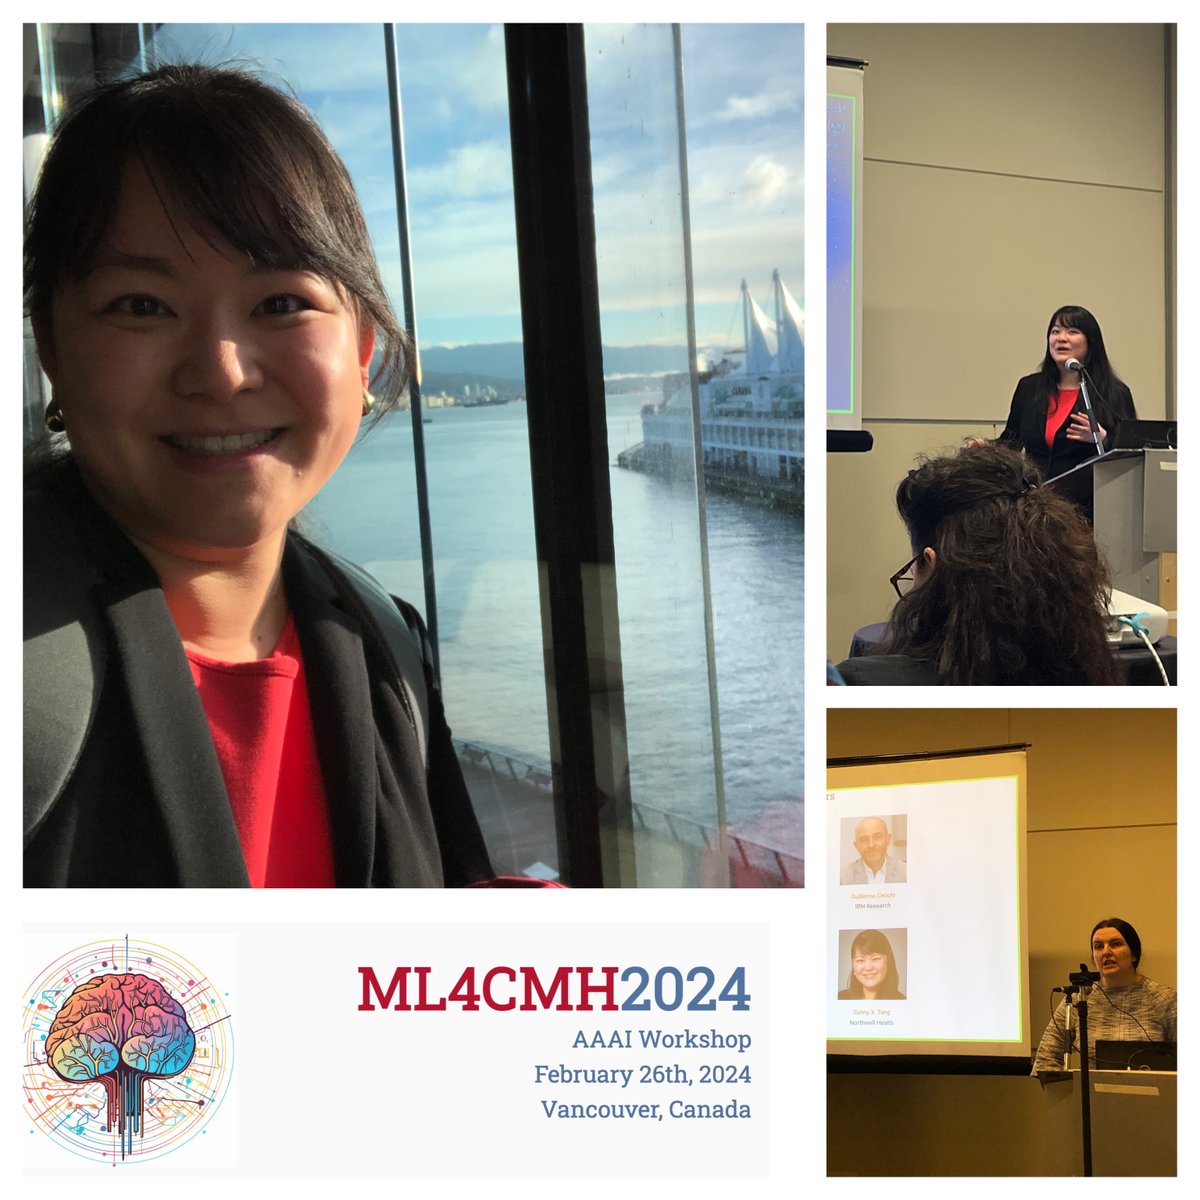 Really grateful to have participated in the first ever #ML4CMH Machine Learning for Cognitive and Mental Health workshop at @RealAAAI annual meeting! Kudos to the organizers for putting together such a great event - I learned so much!!